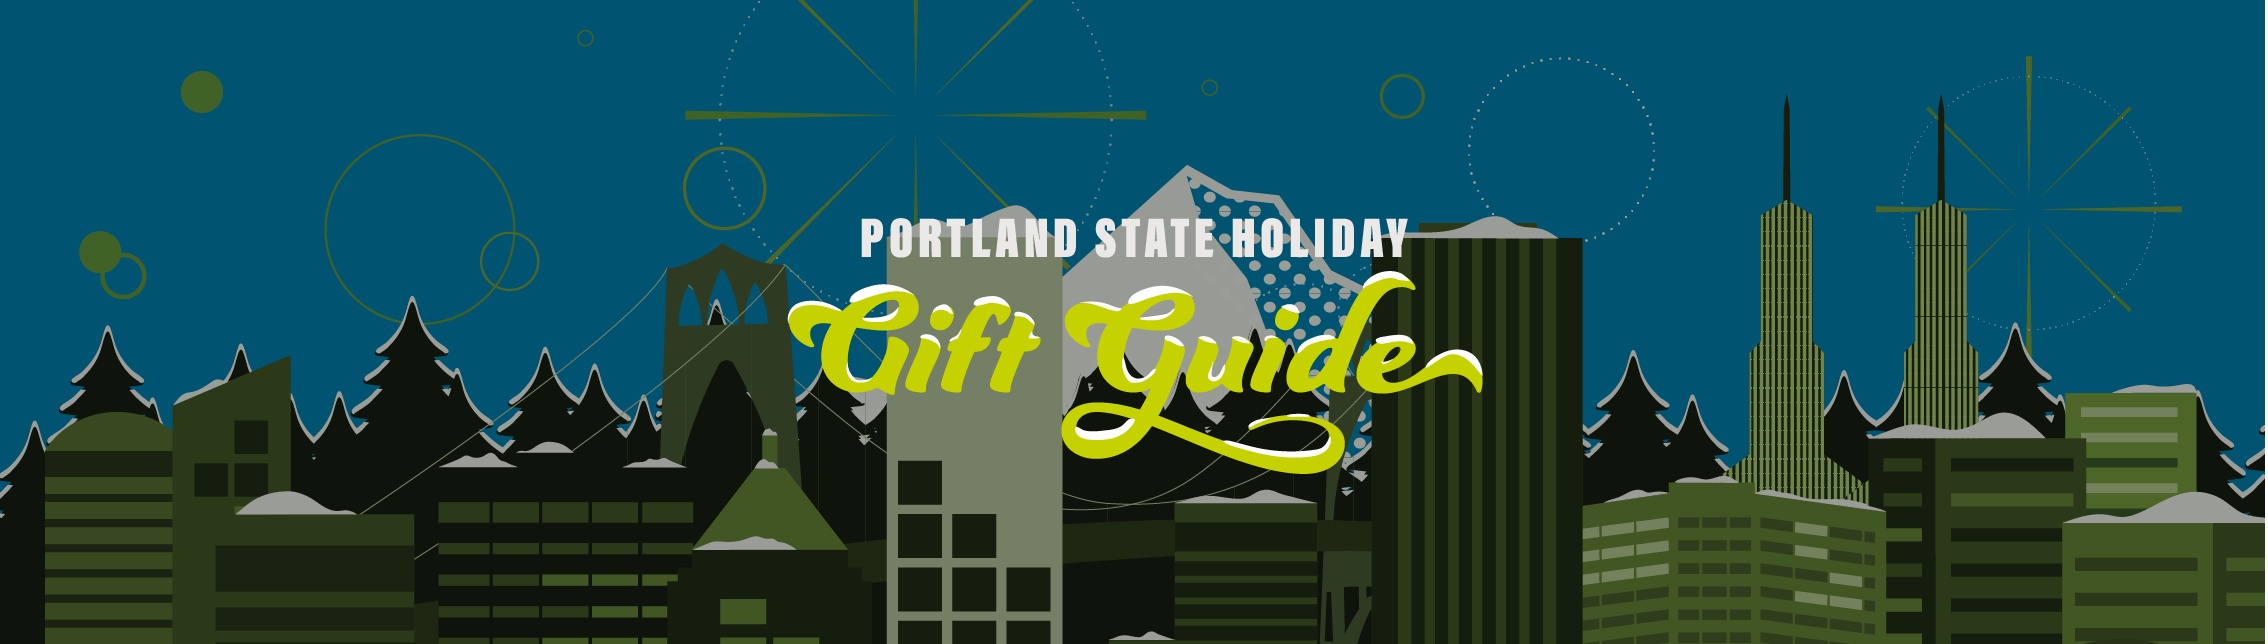 Portland State Holiday Gift Guide